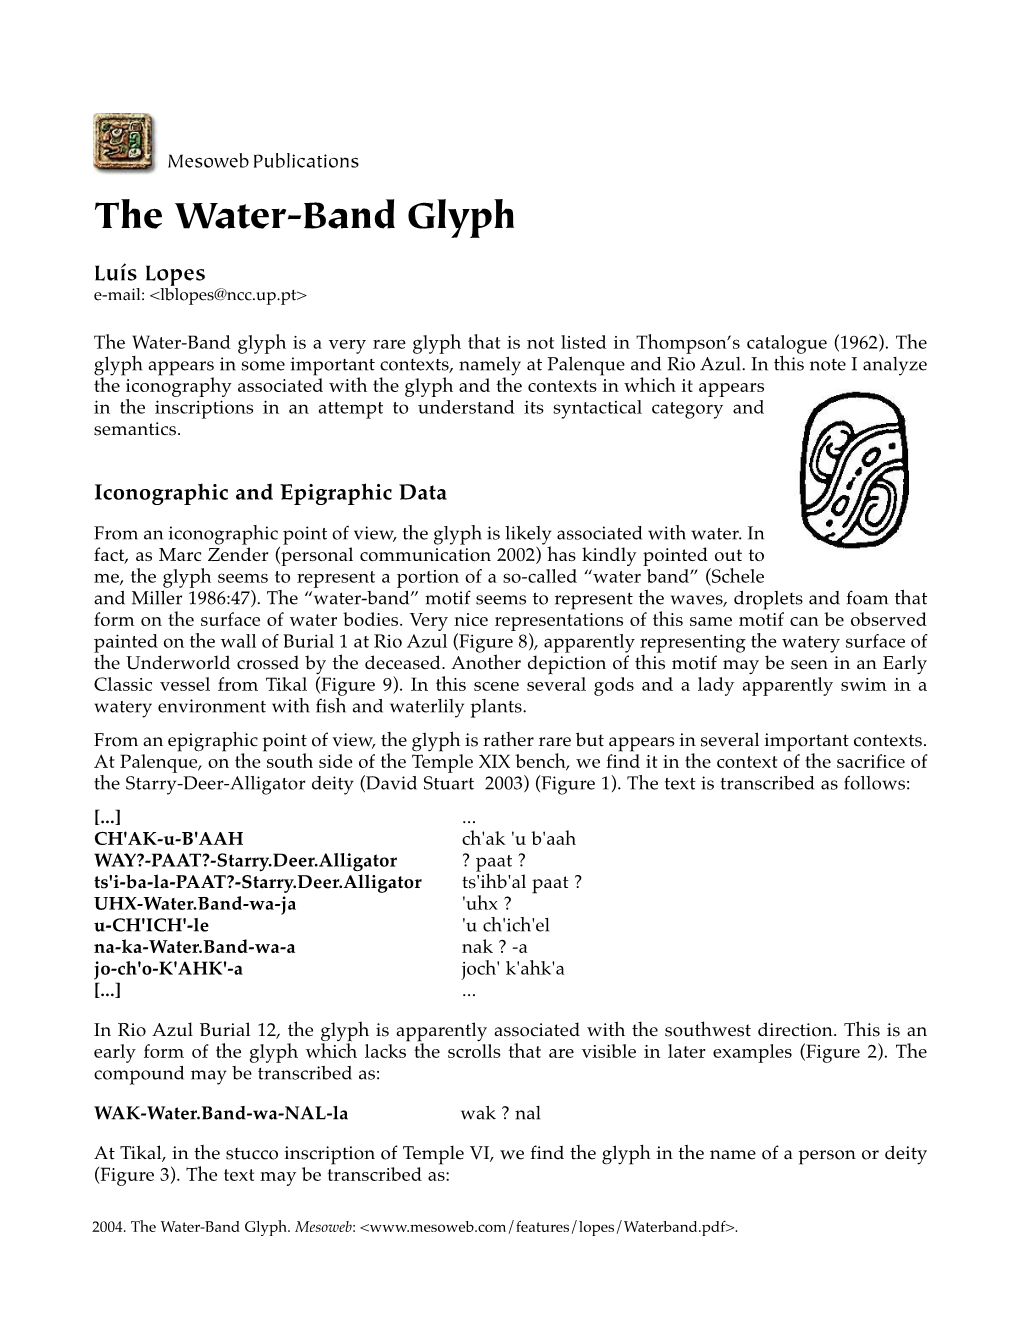 The Water-Band Glyph